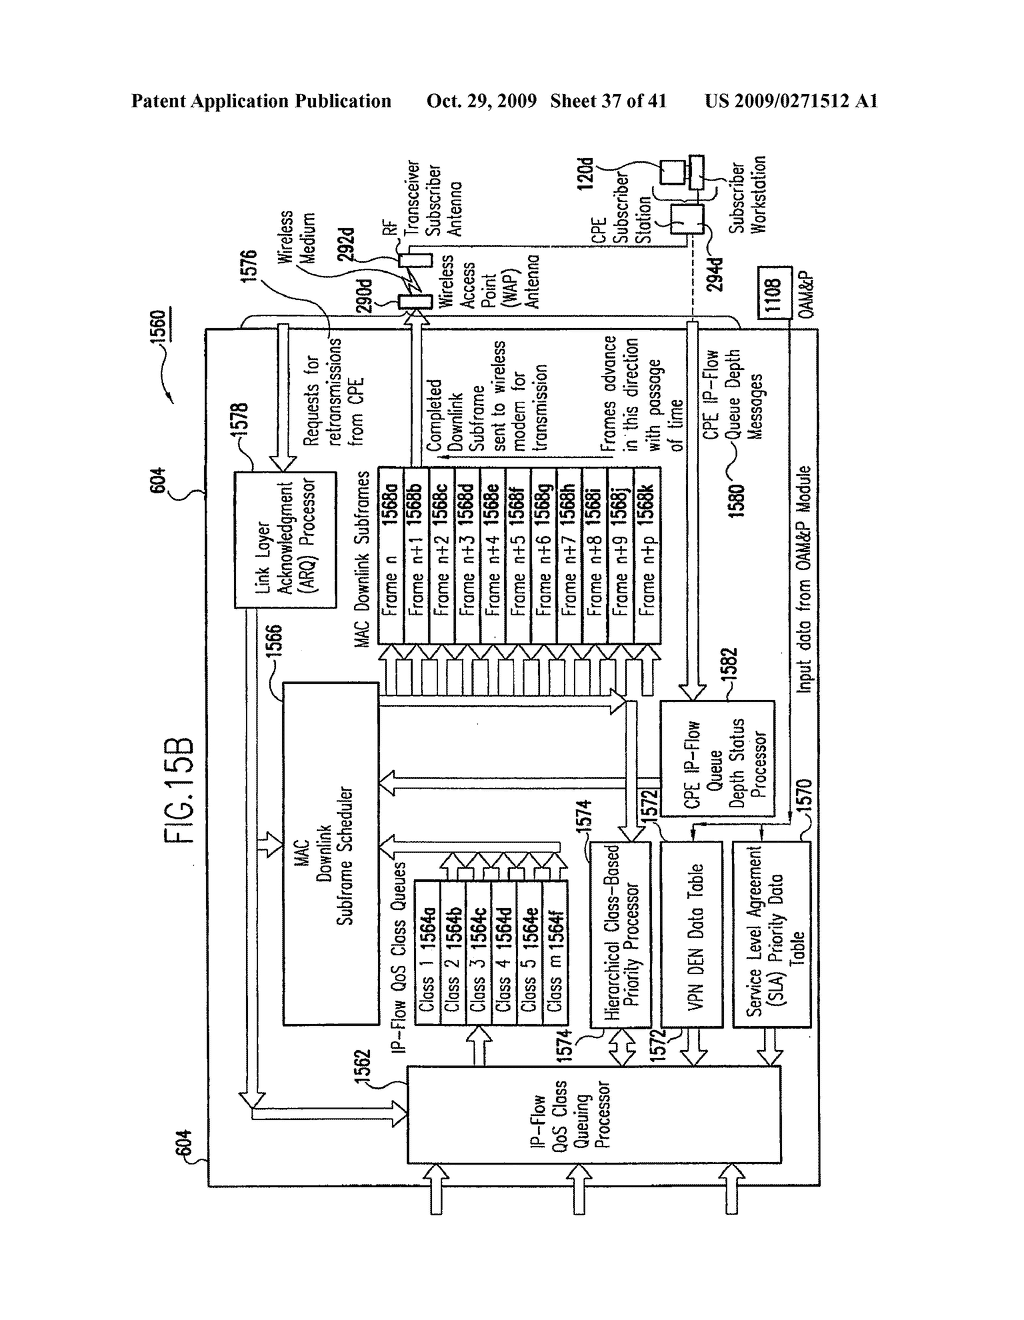 TRANSMISSION CONTROL PROTOCOL/INTERNET PROTOCOL (TCP/IP) PACKET-CENTRIC WIRELESS POINT TO MULTI-POINT (PtMP) TRANSMISSION SYSTEM ARCHITECTURE - diagram, schematic, and image 38